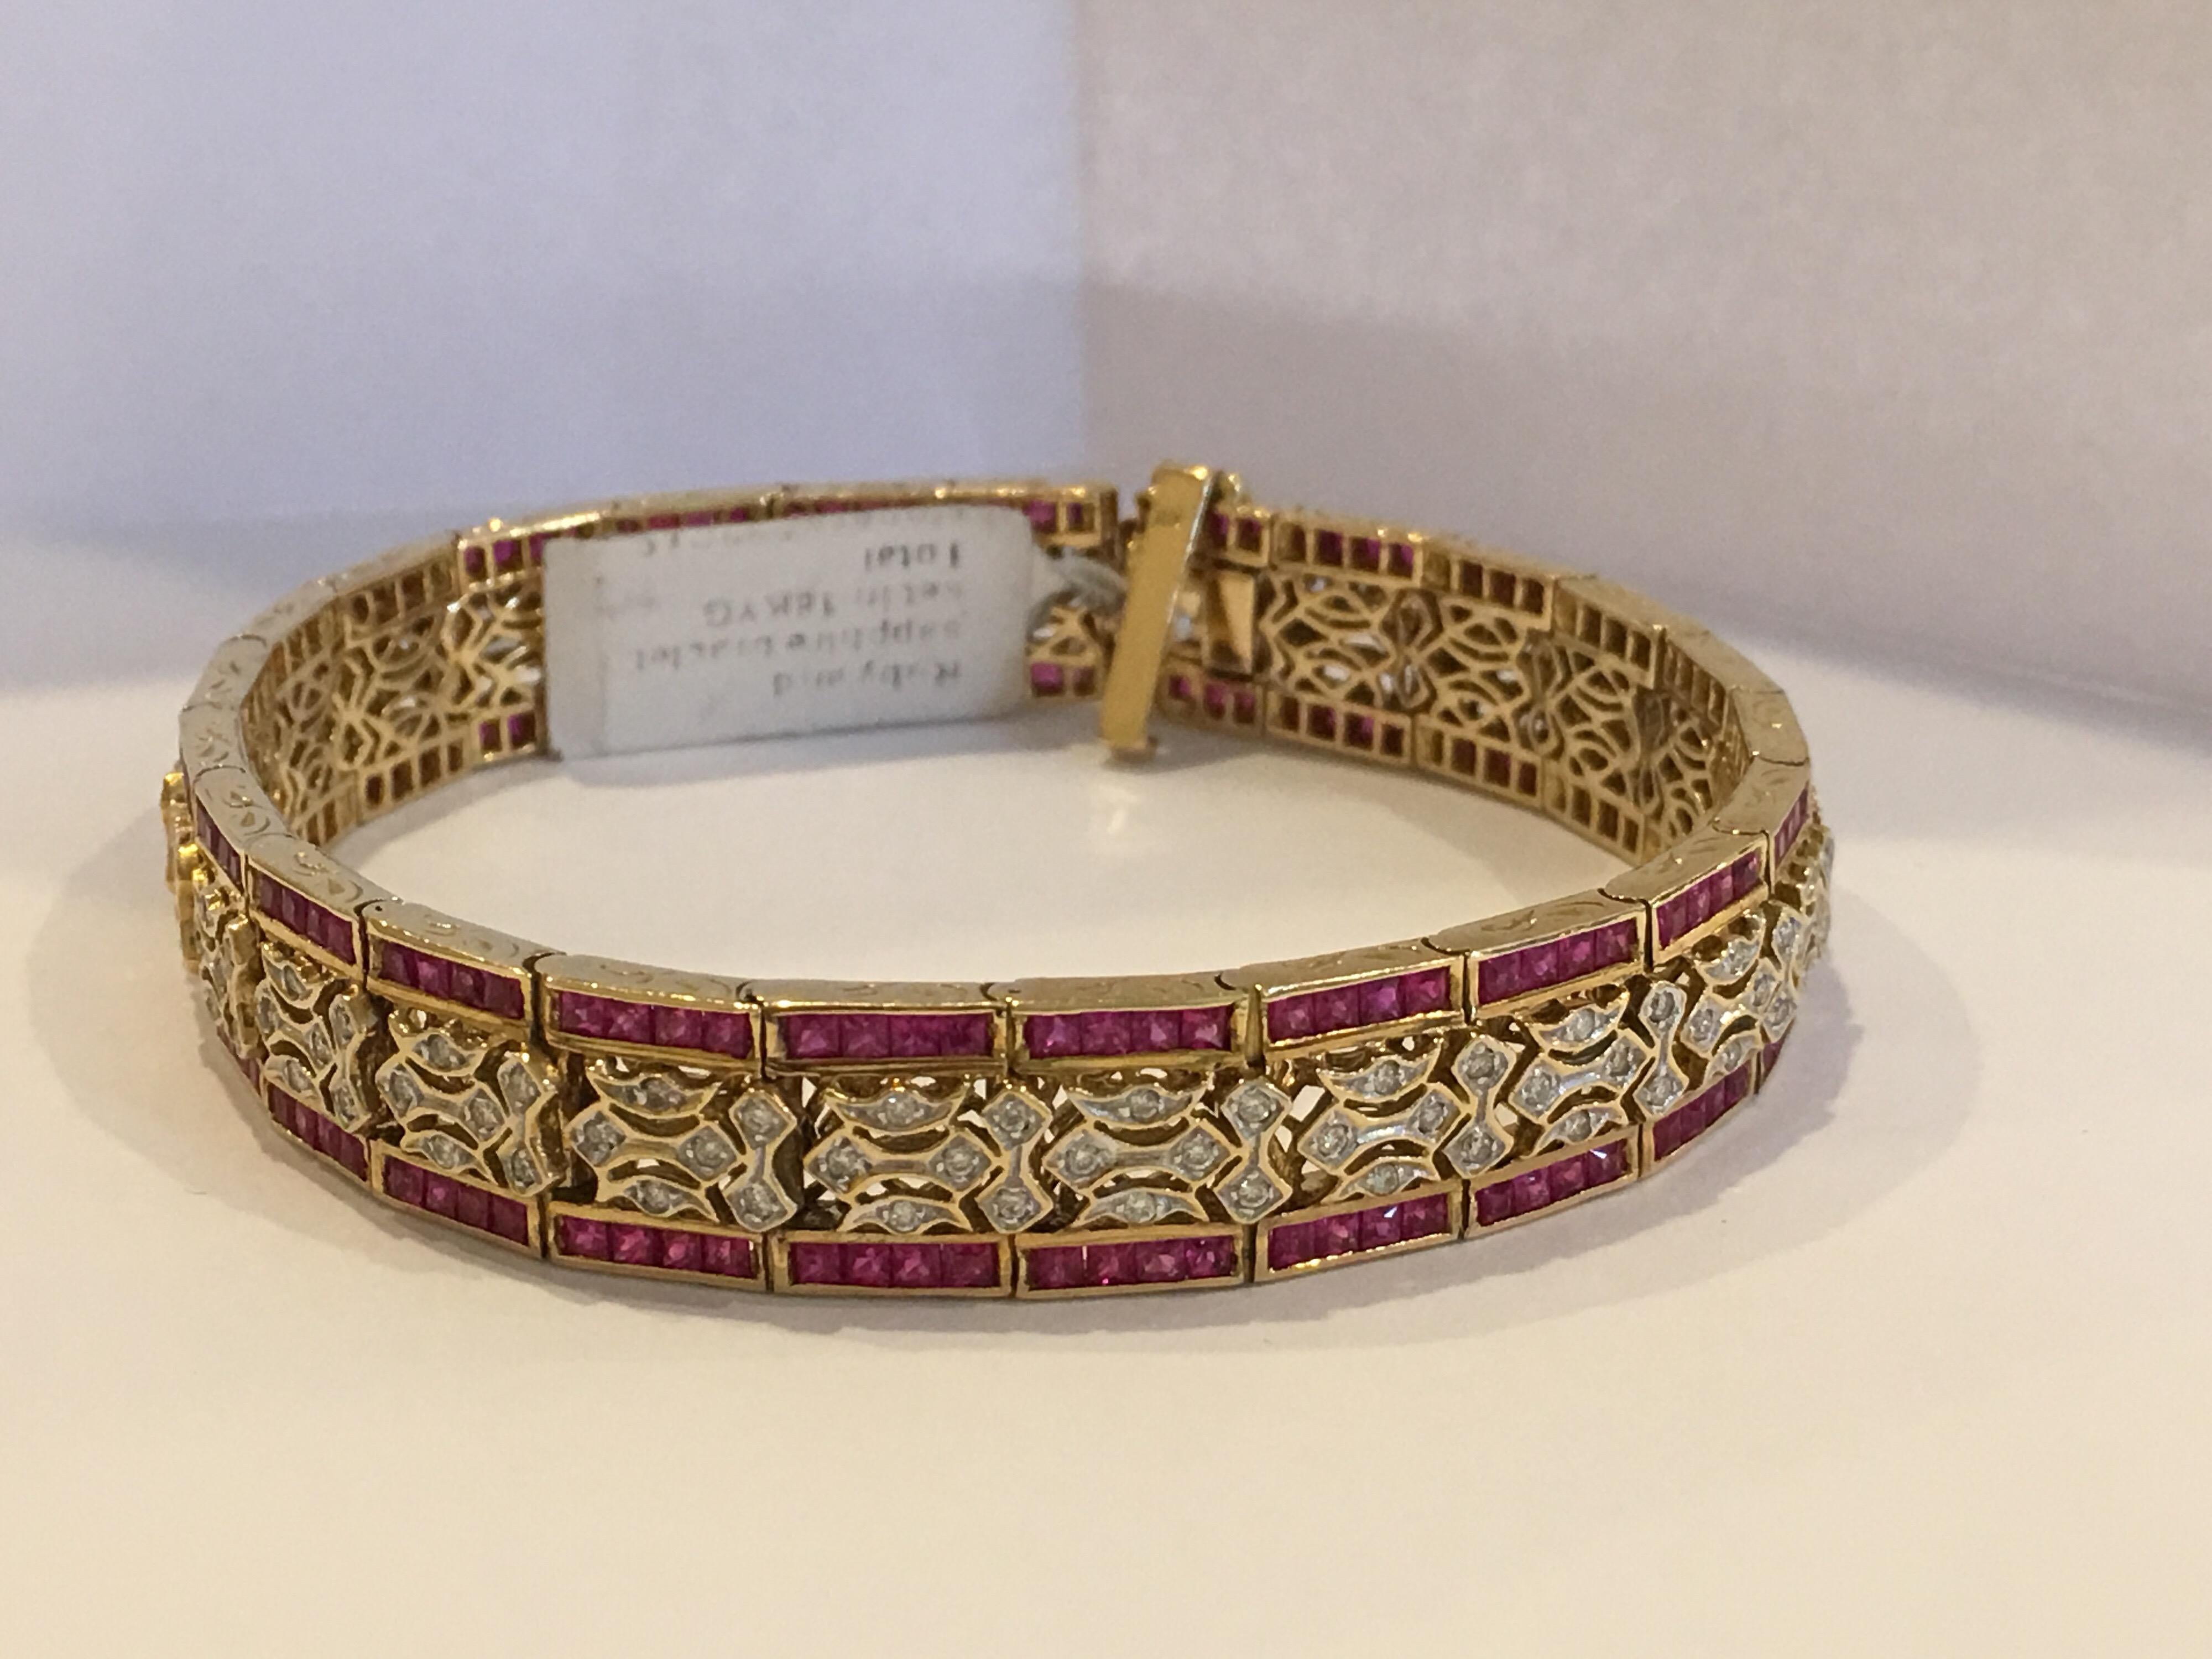 Ruby and Diamonds Bracelet set in 18 K Yellow Gold.
One of a Kind Hand crafted Bracelet.